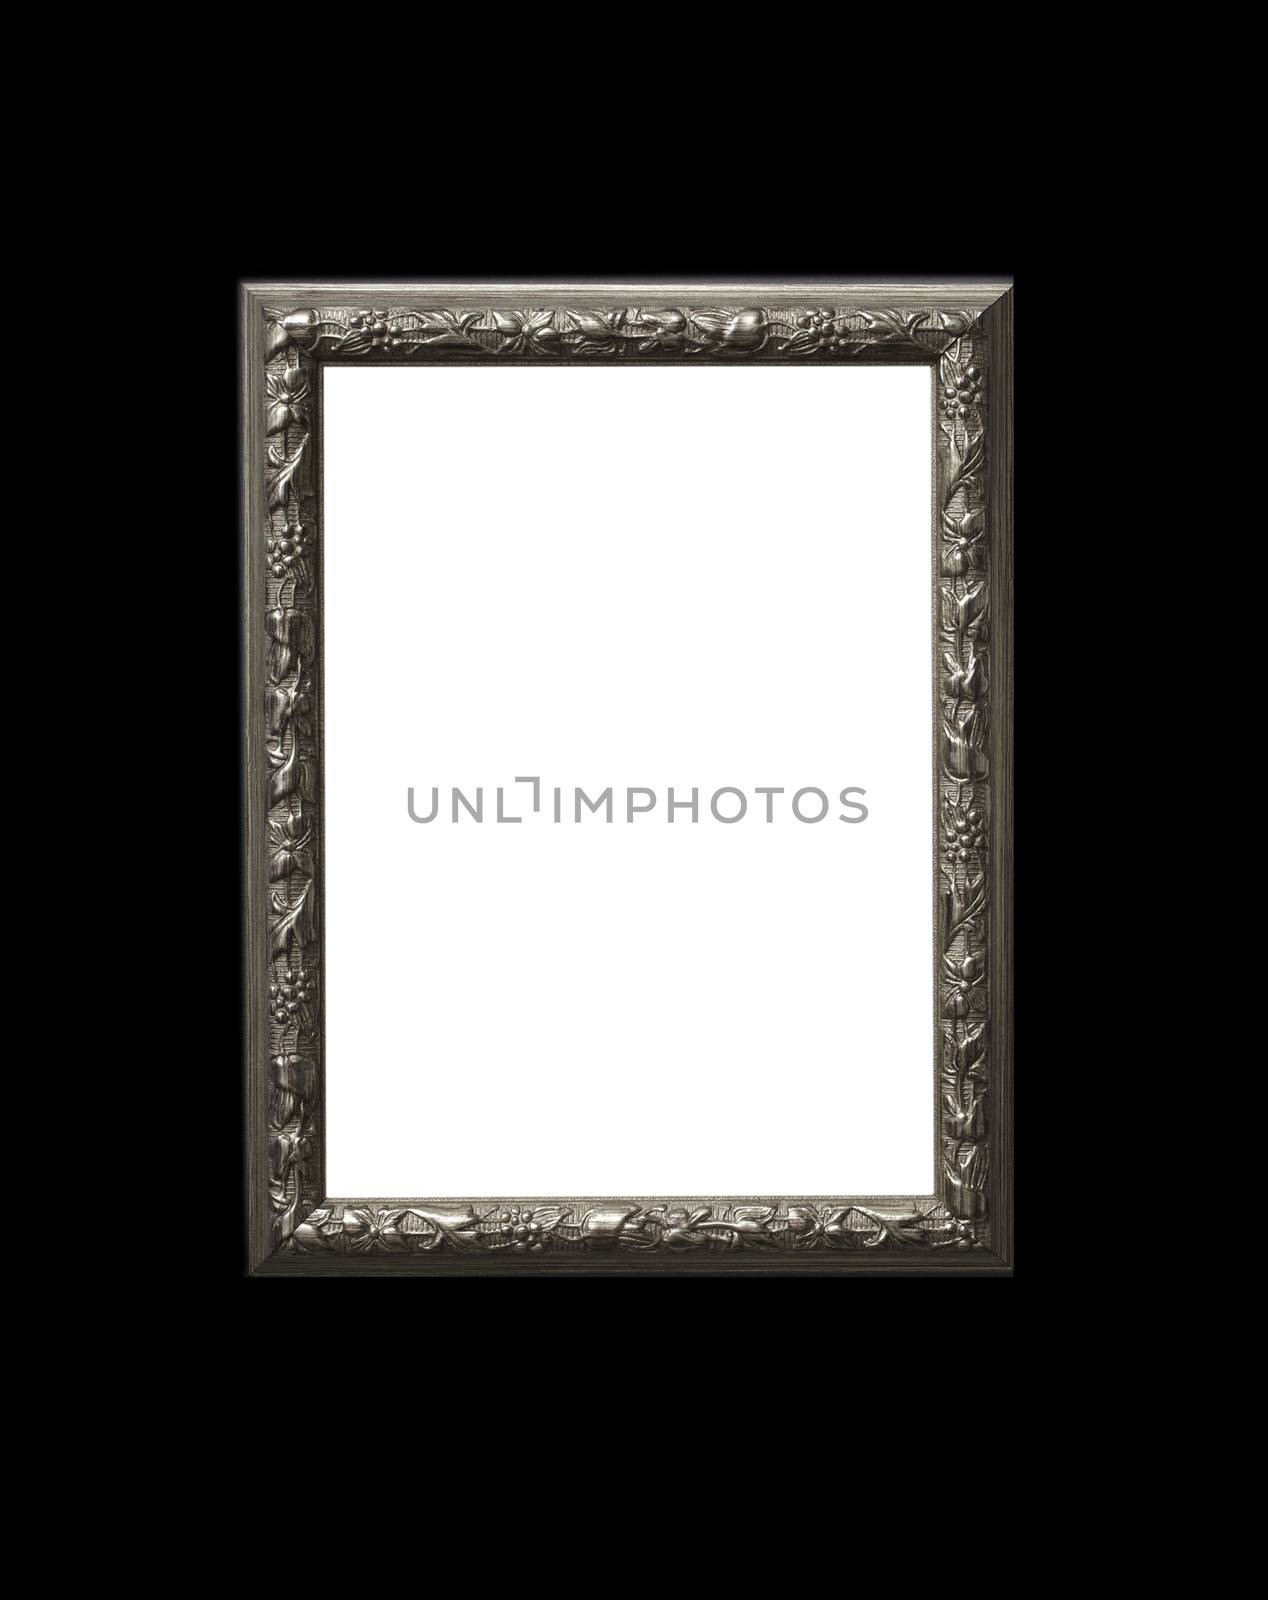 Vintage and blank photo frame on old wooden background by ohhlanla